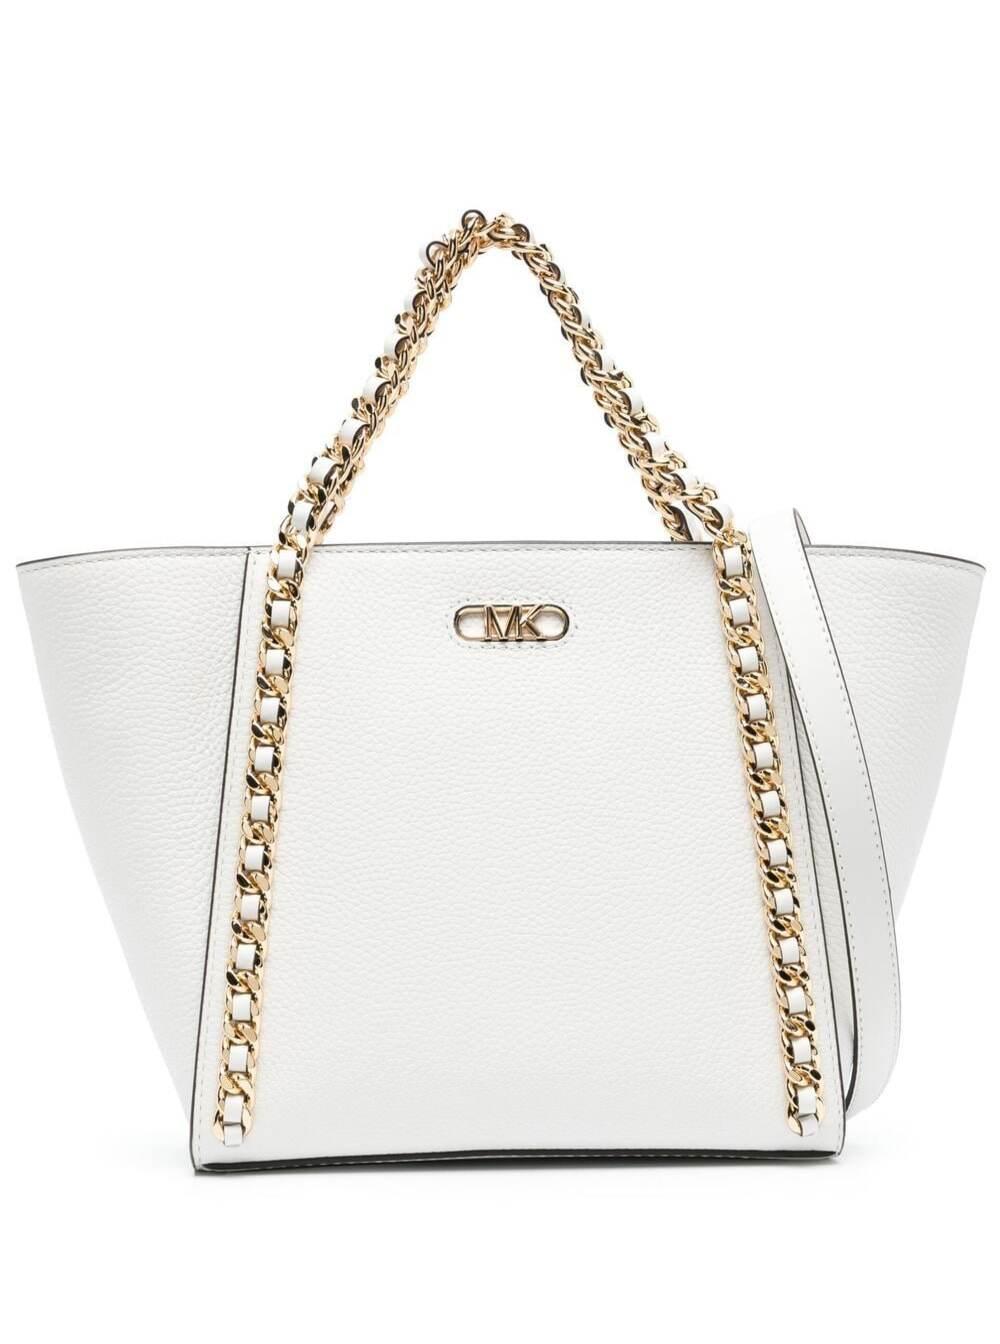 Michael Kors Westley White Tote Bag In Cow Leather | Lyst